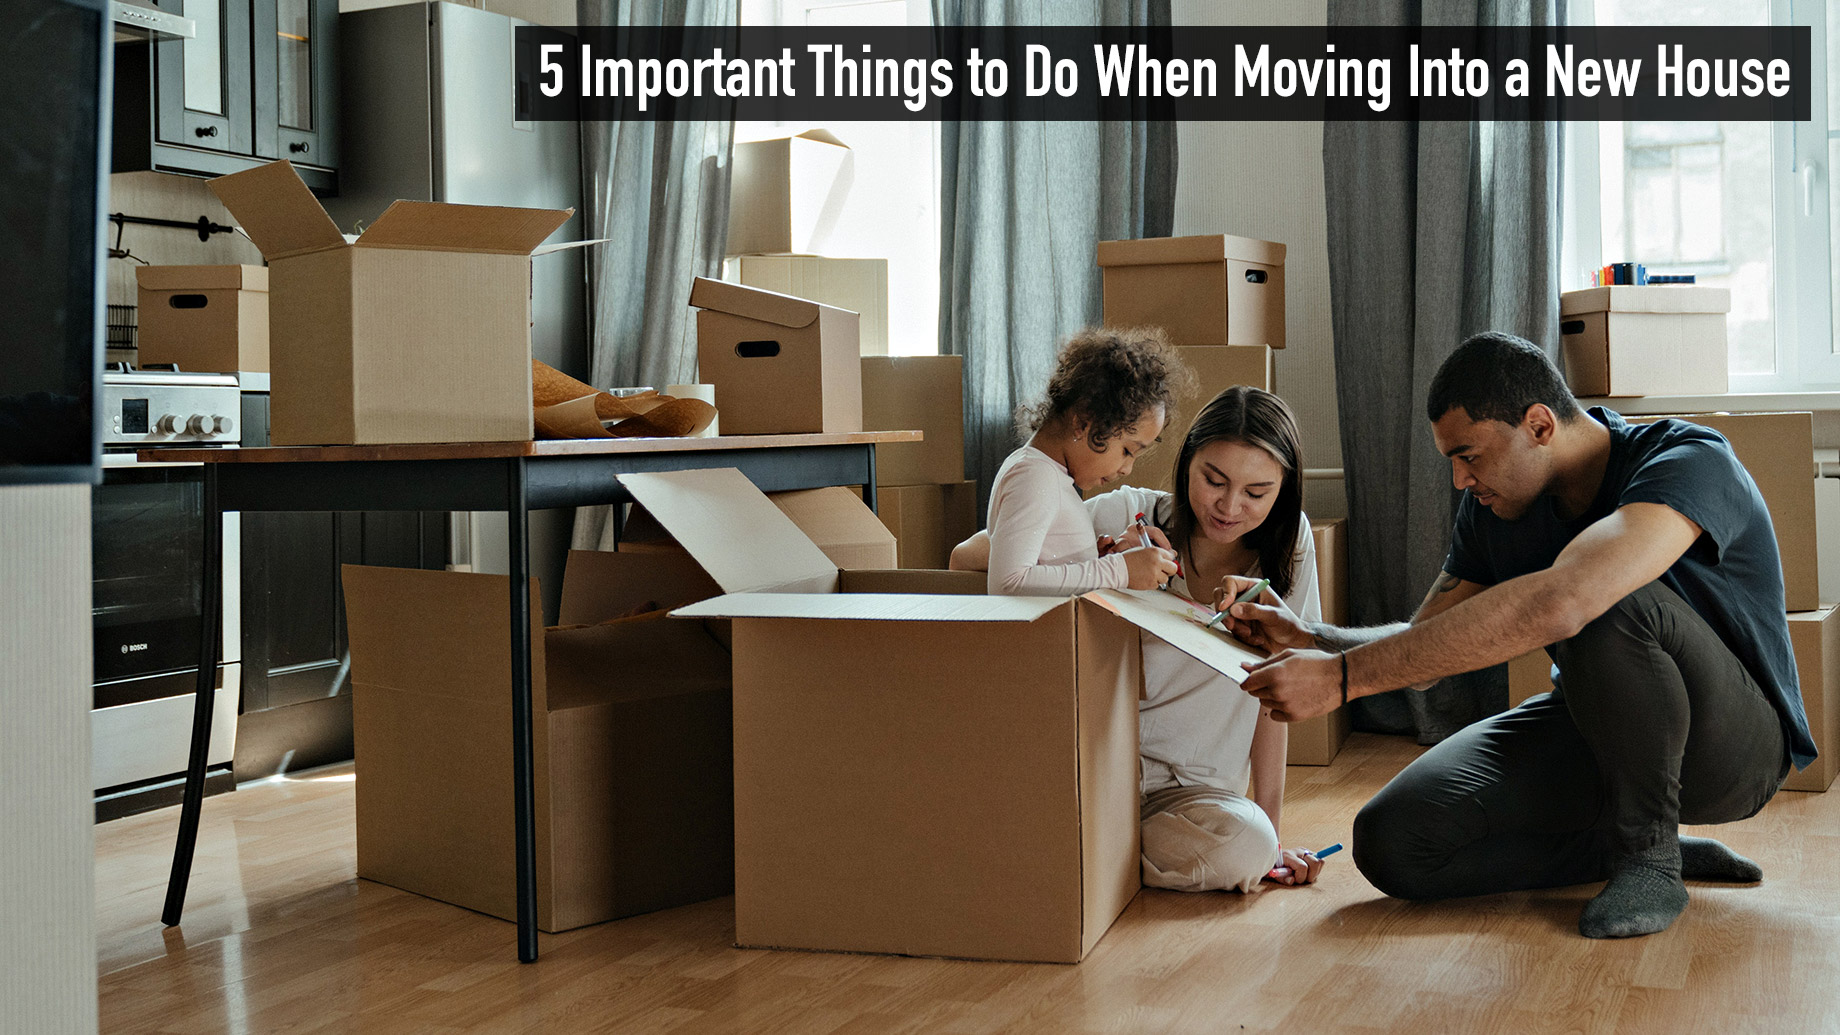 5 Important Things to Do When Moving Into a New House